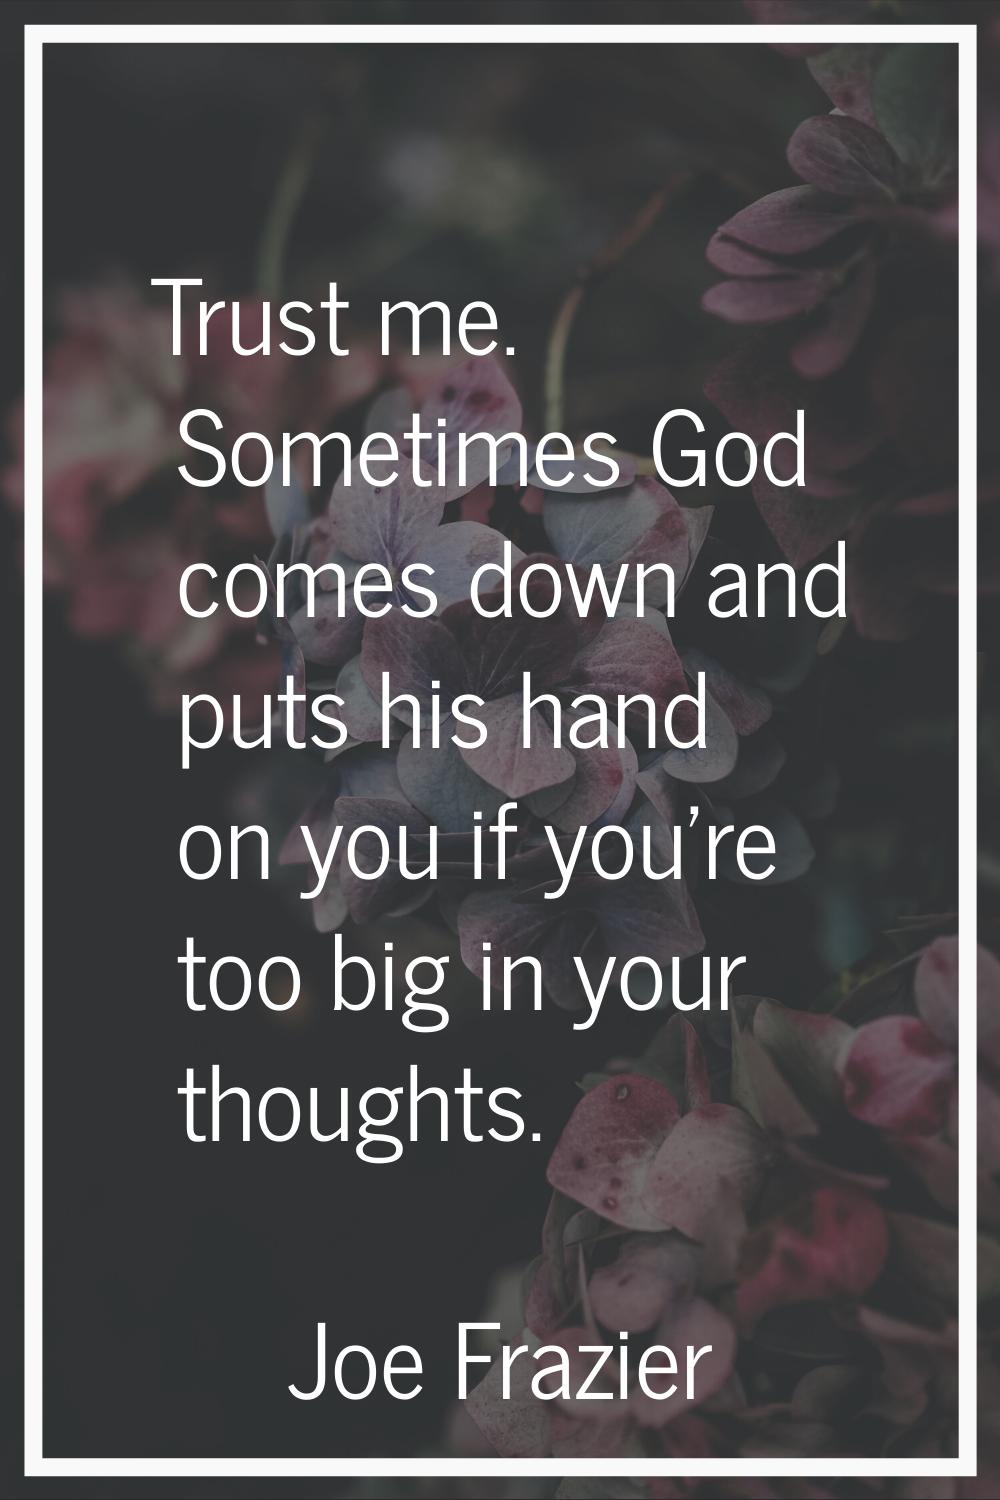 Trust me. Sometimes God comes down and puts his hand on you if you're too big in your thoughts.